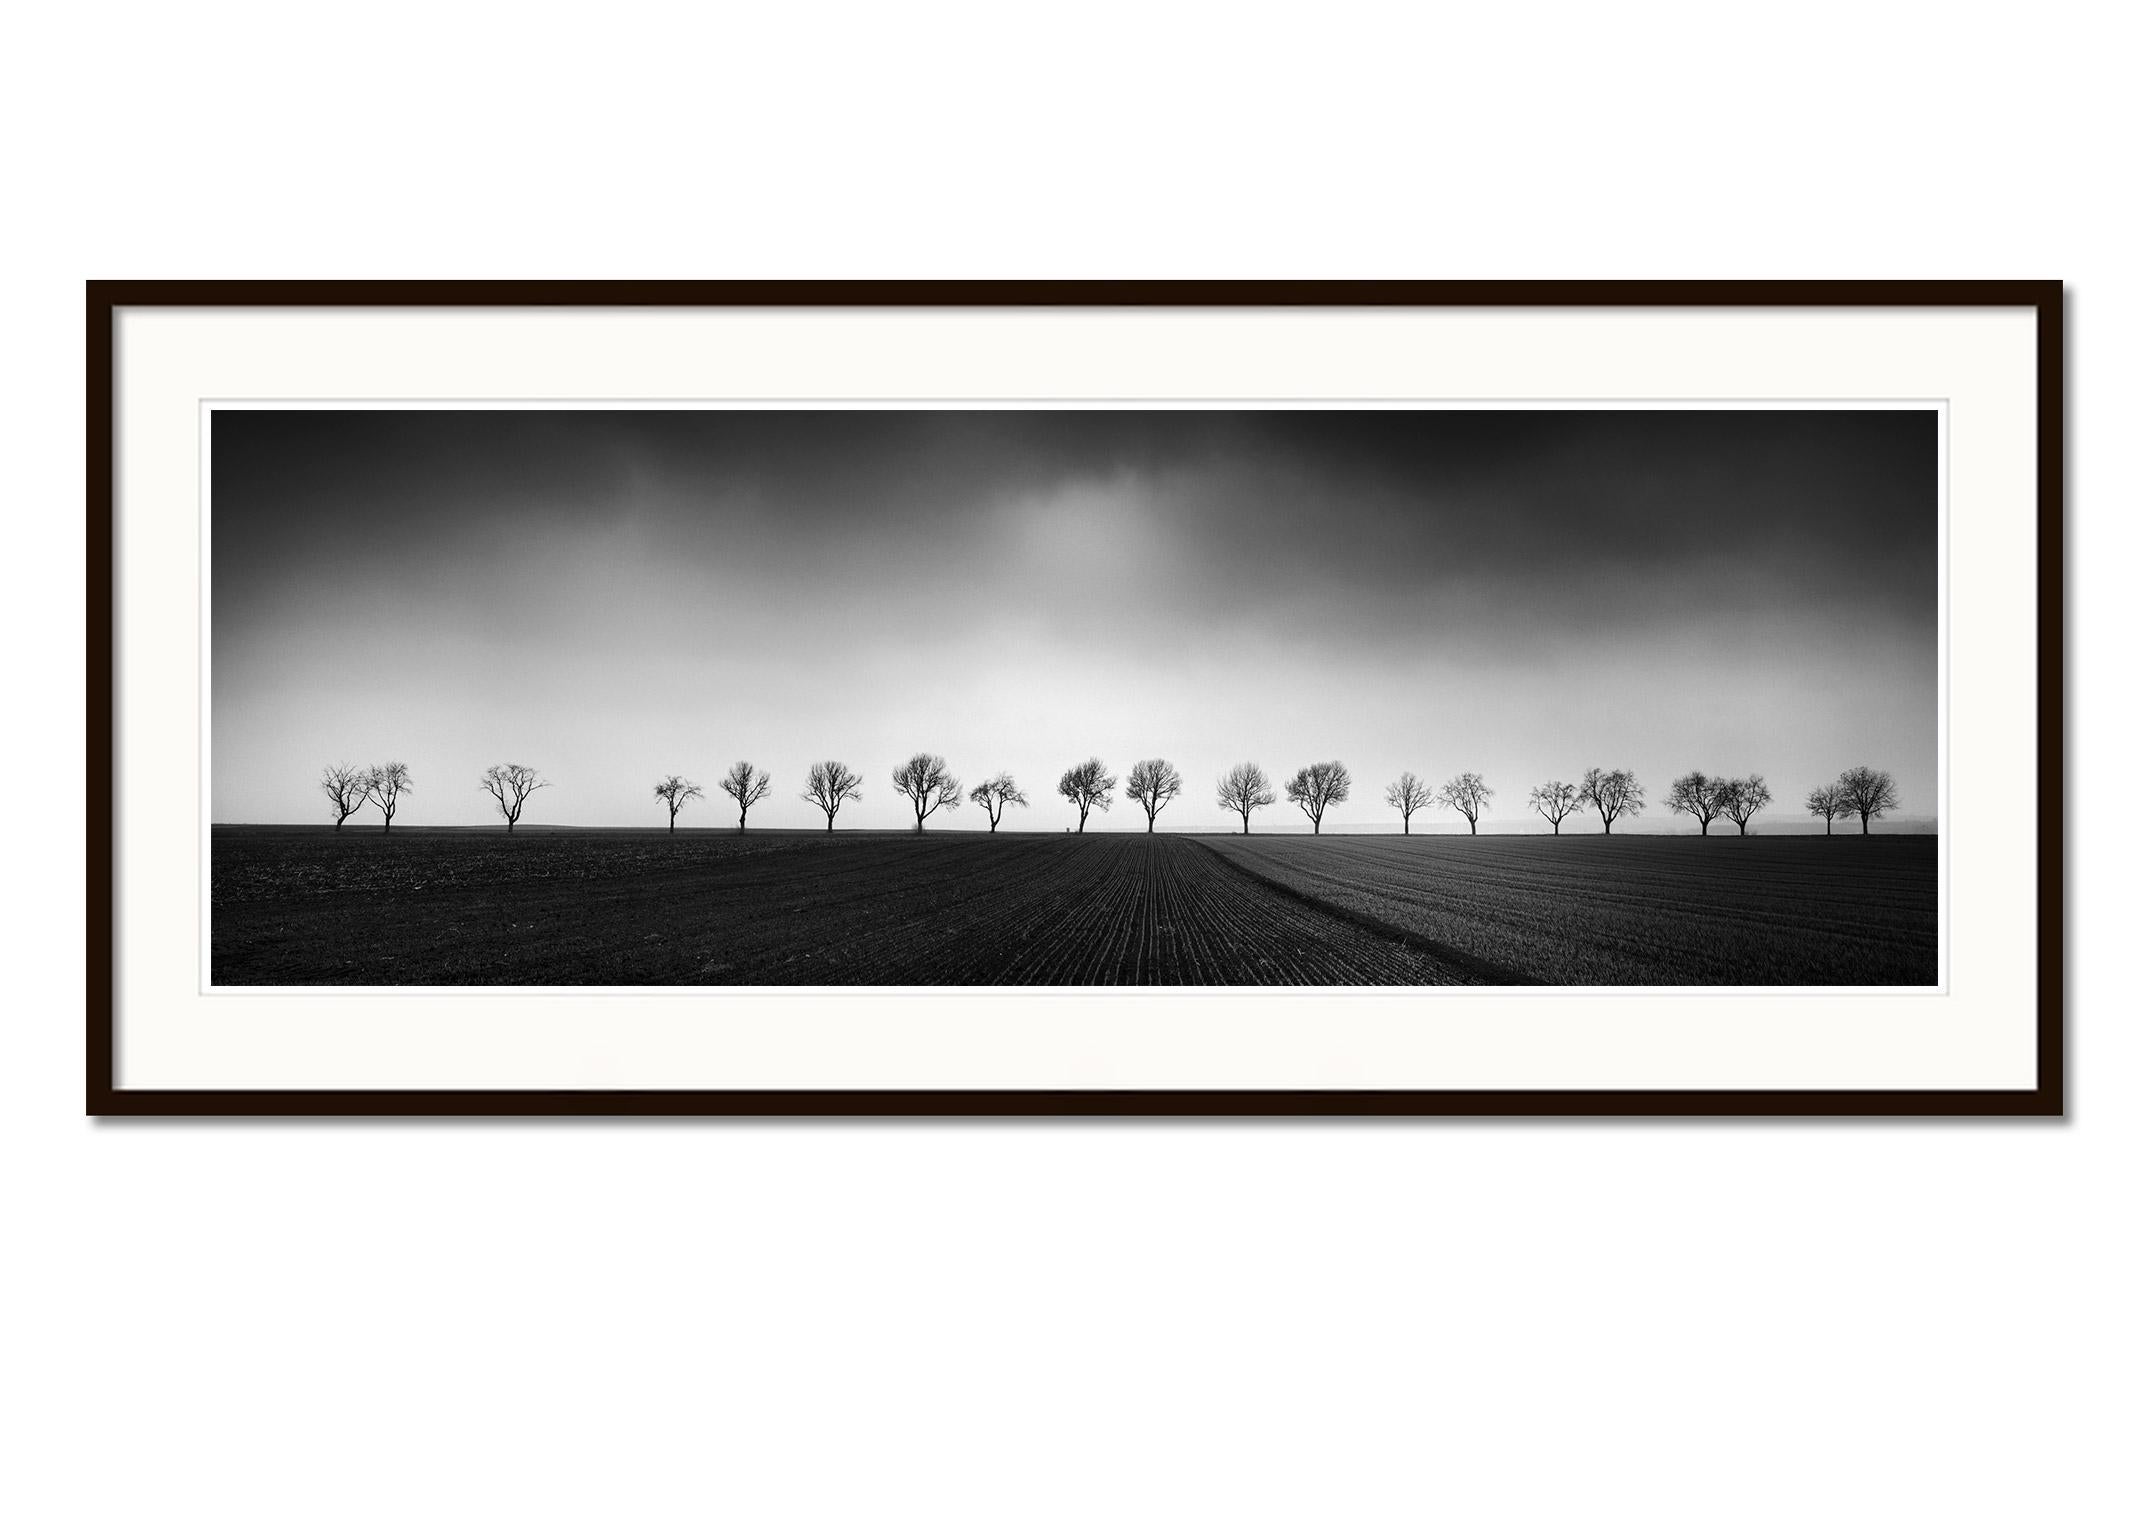 Twenty cherry Trees avenue cornfield black white panorama landscape photography - Gray Black and White Photograph by Gerald Berghammer